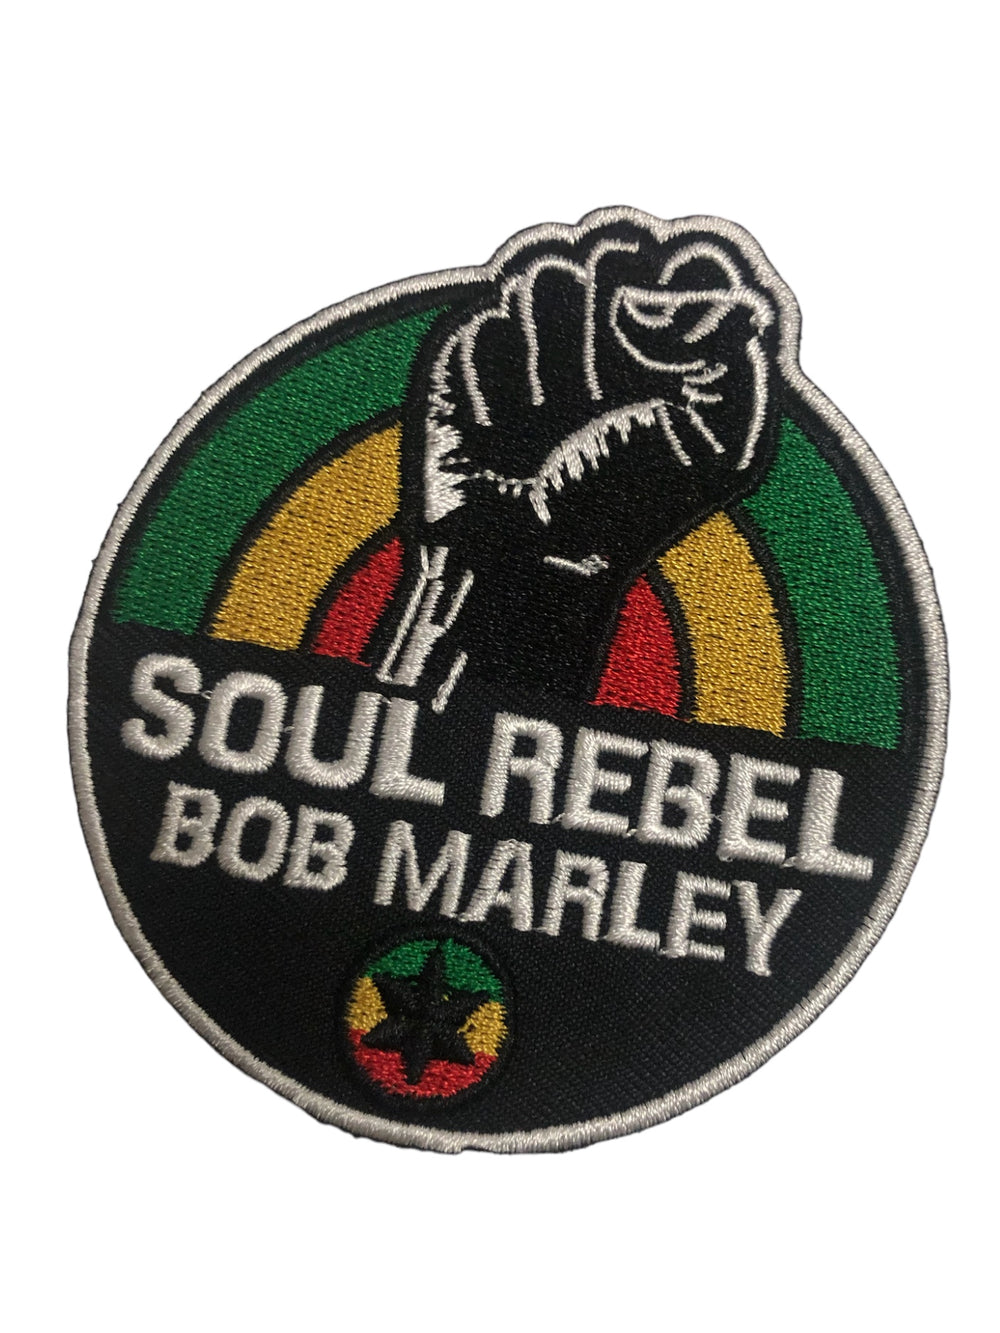 Bob Marley Soul Power Official Woven Patch Brand New